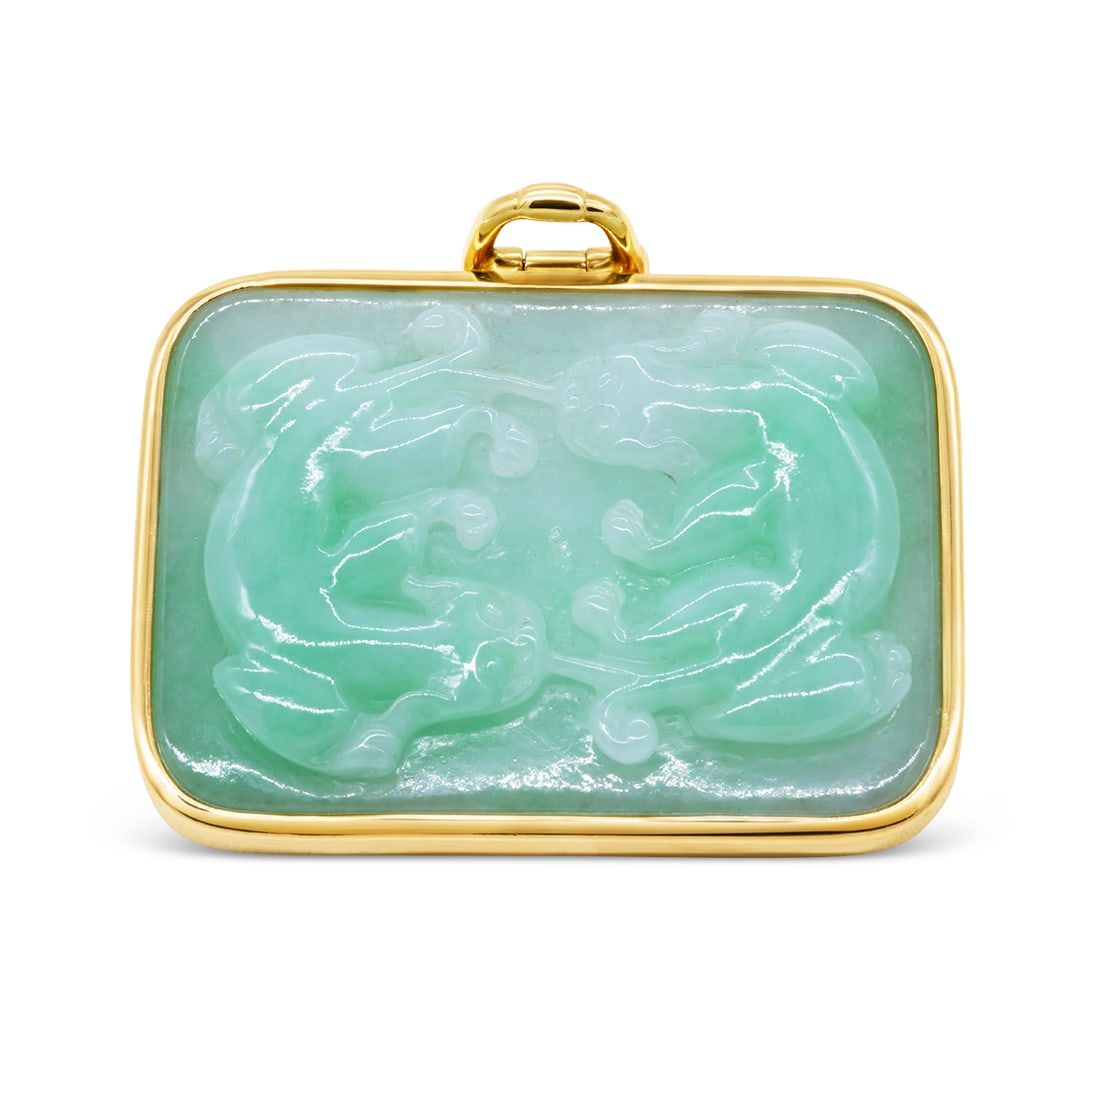 14K YELLOW GOLD CARVED JADE "GUMPS"